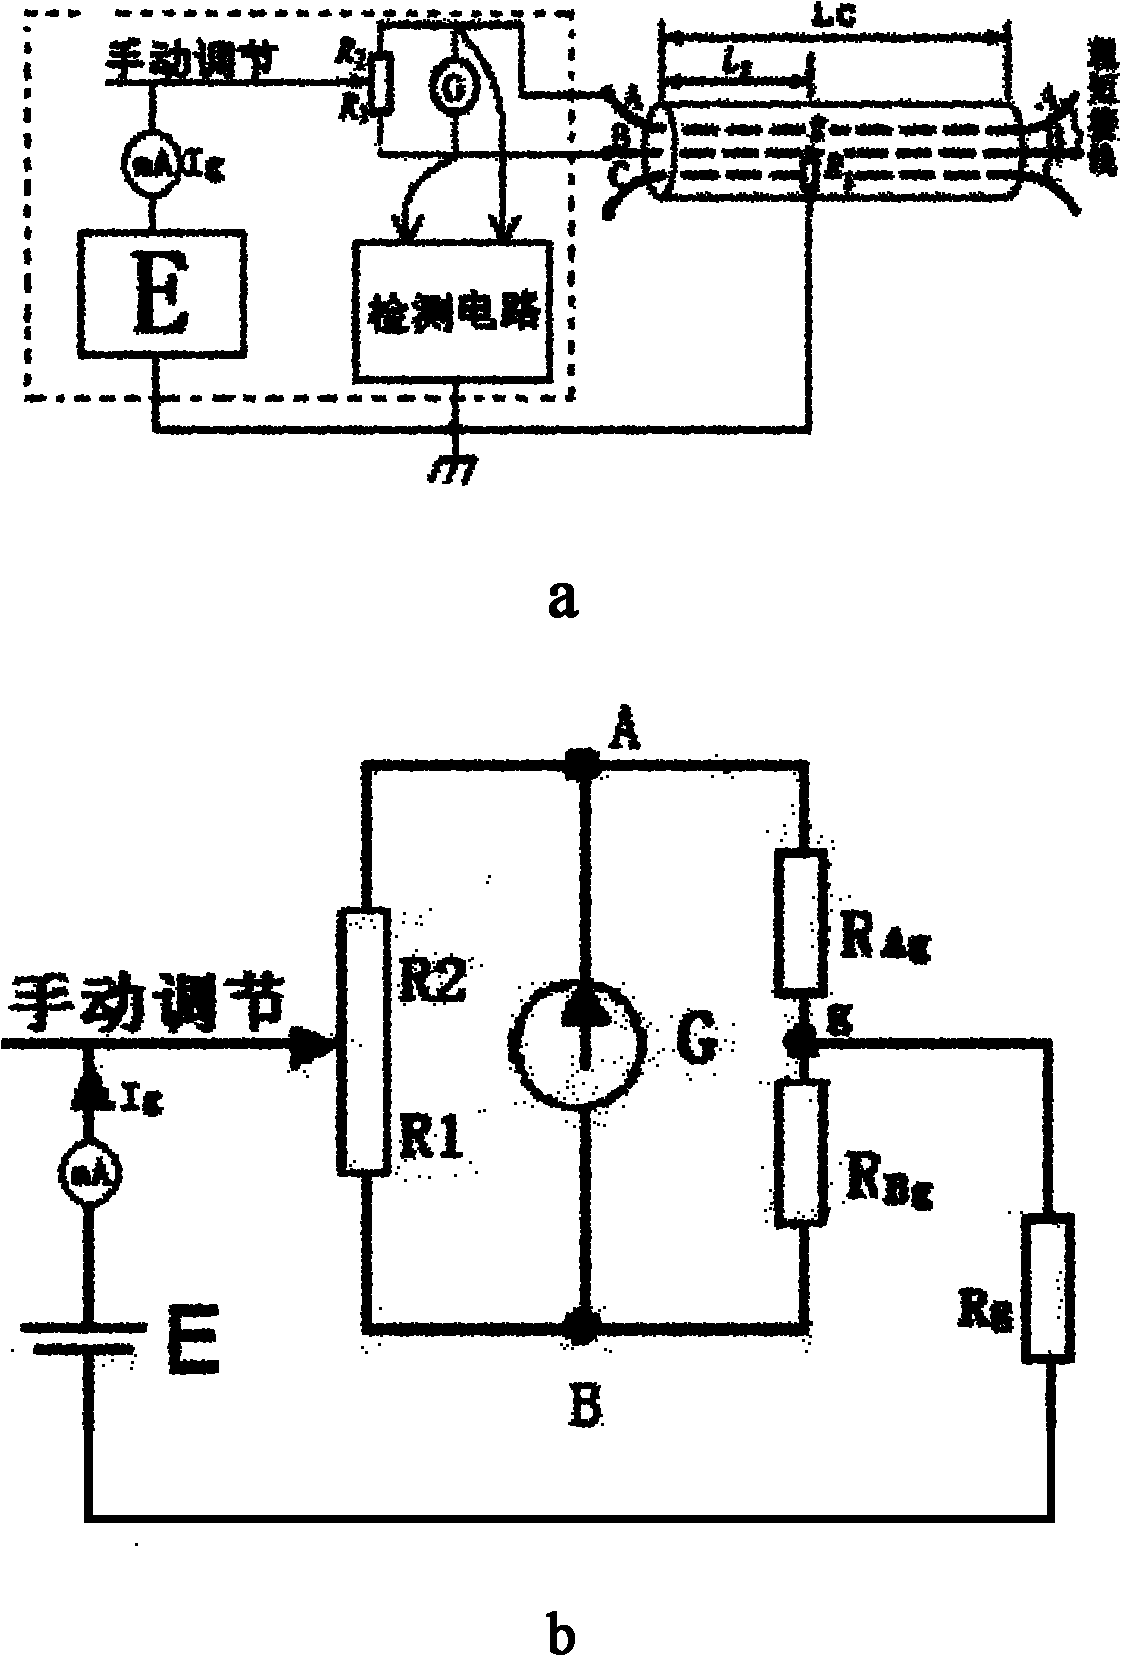 Device and method for testing power cable fault